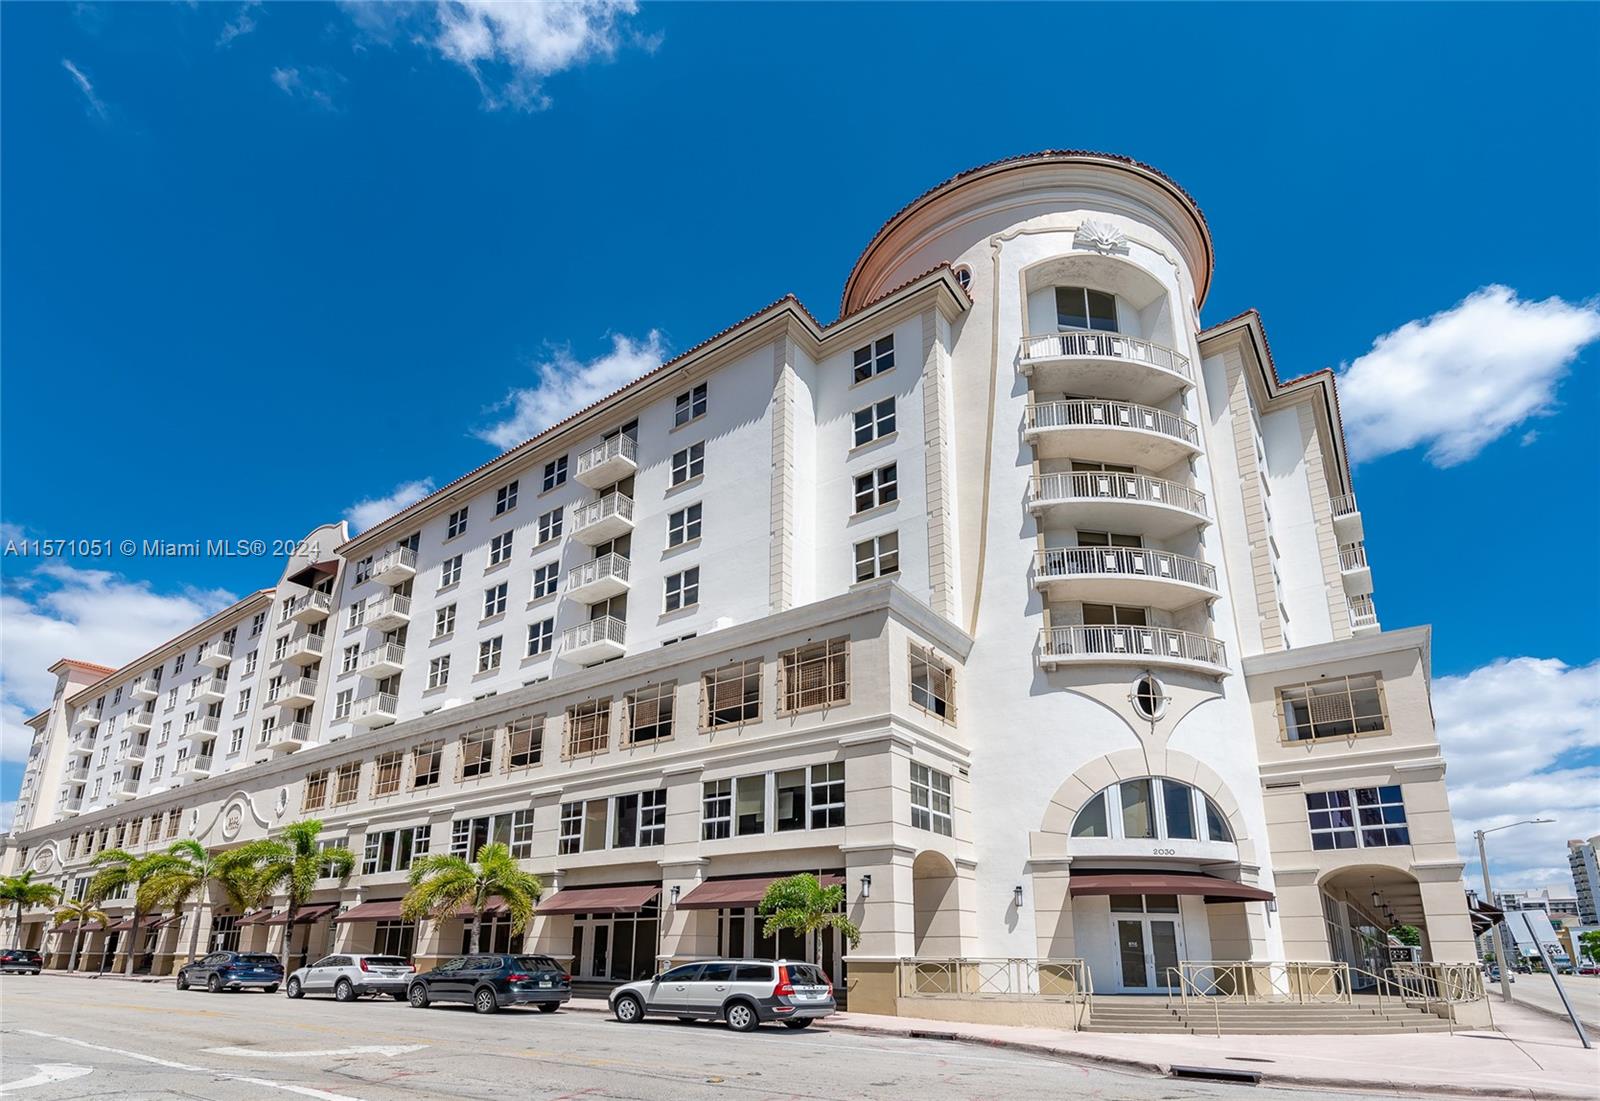 Fabulous location 2/2, split plan condo in heart of downtown Coral Gables.  Generous walk-in closets, with linen closet in principal bedroom.  Spacious Kitchen opens to living/dining room. Balcony offer views of Gables & Miami Skyline.  Amenities include: swimming pool, jacuzzi, exercise room & meeting room.  Quick walk to Miracle Mile, boutiques, restaurants, bar, theaters, movies, & general entertainment. Coral Gables & Miami Trolleys for a quick ride to Douglas Road Metro Station. Easy to show, just call the listing agent for a private showing.